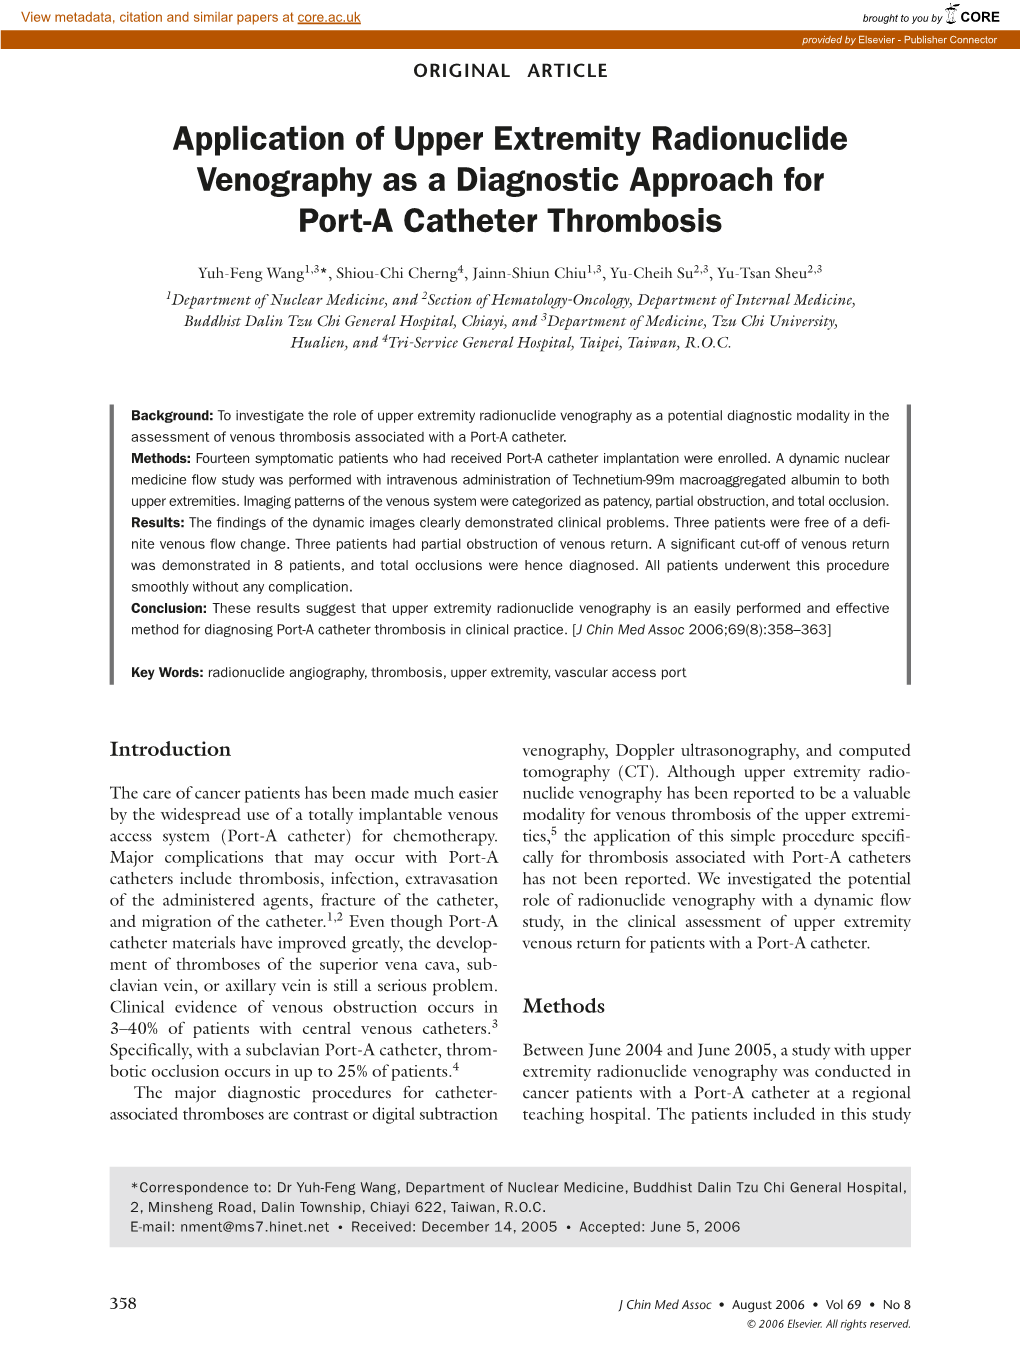 Application of Upper Extremity Radionuclide Venography As a Diagnostic Approach for Port-A Catheter Thrombosis